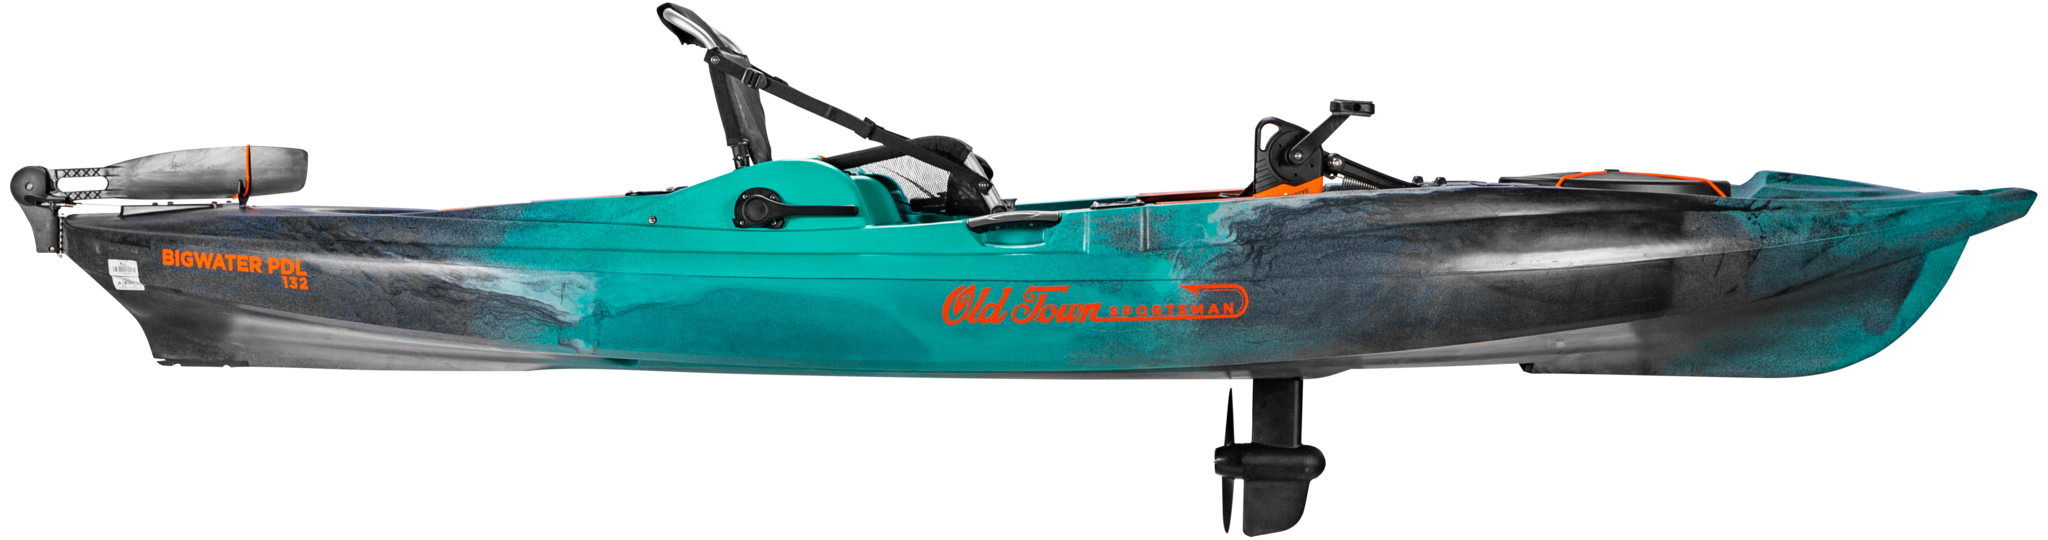 Old Town Sportsman Big Water PDL 132